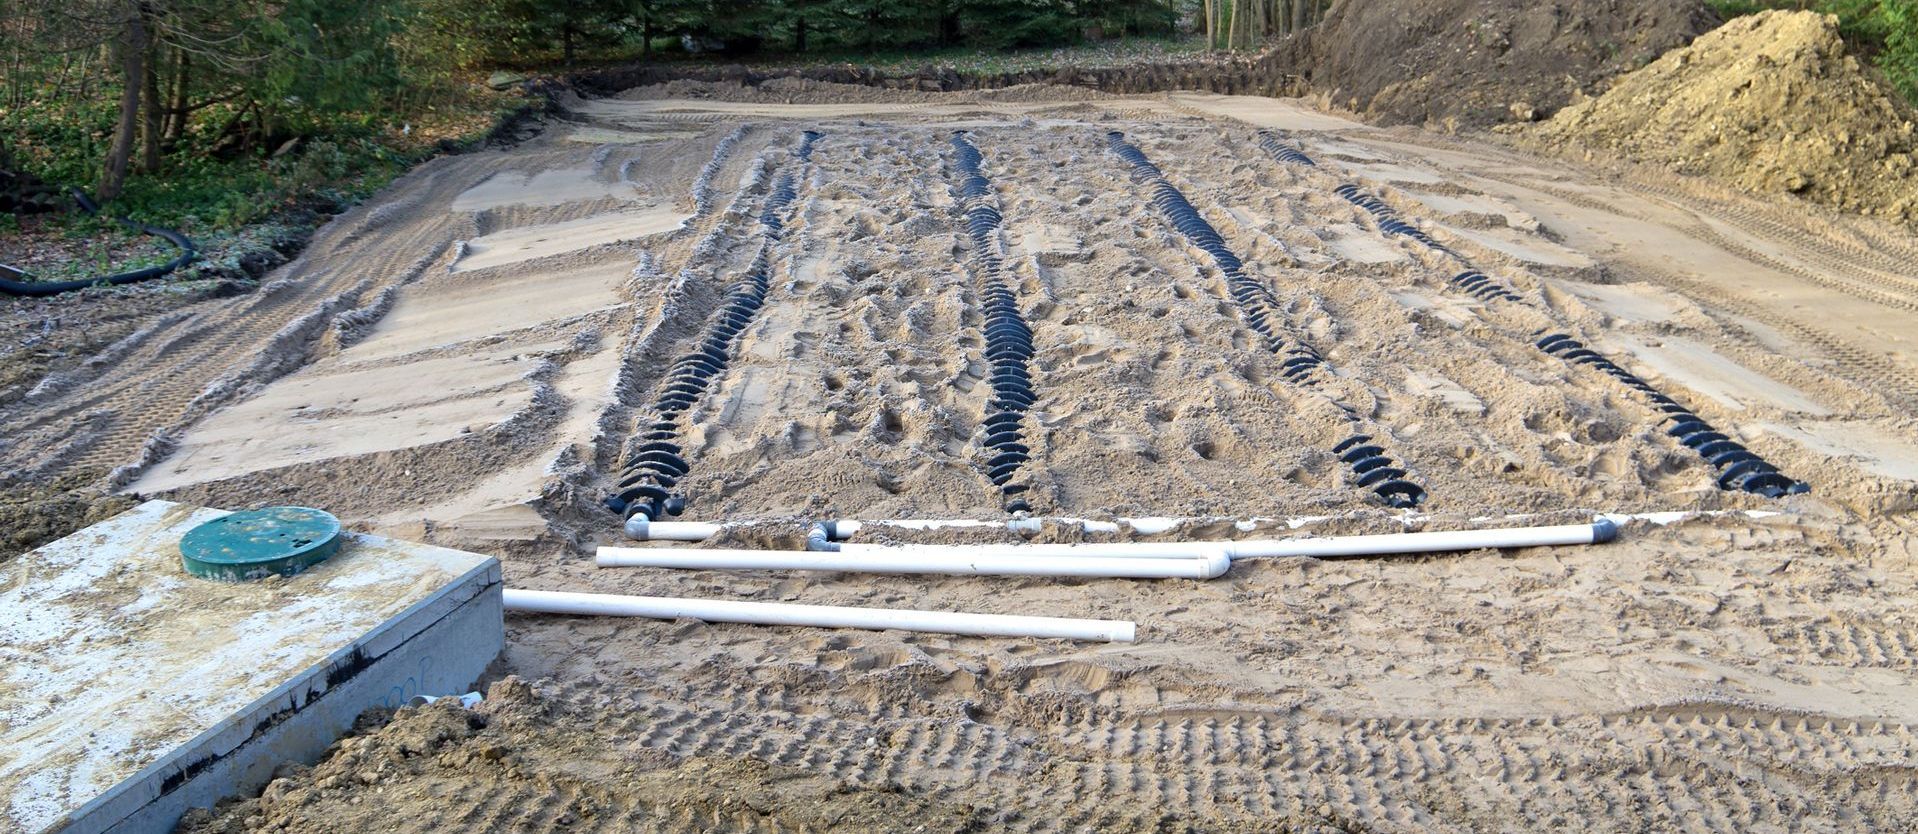 a septic system is being installed in a dirt field